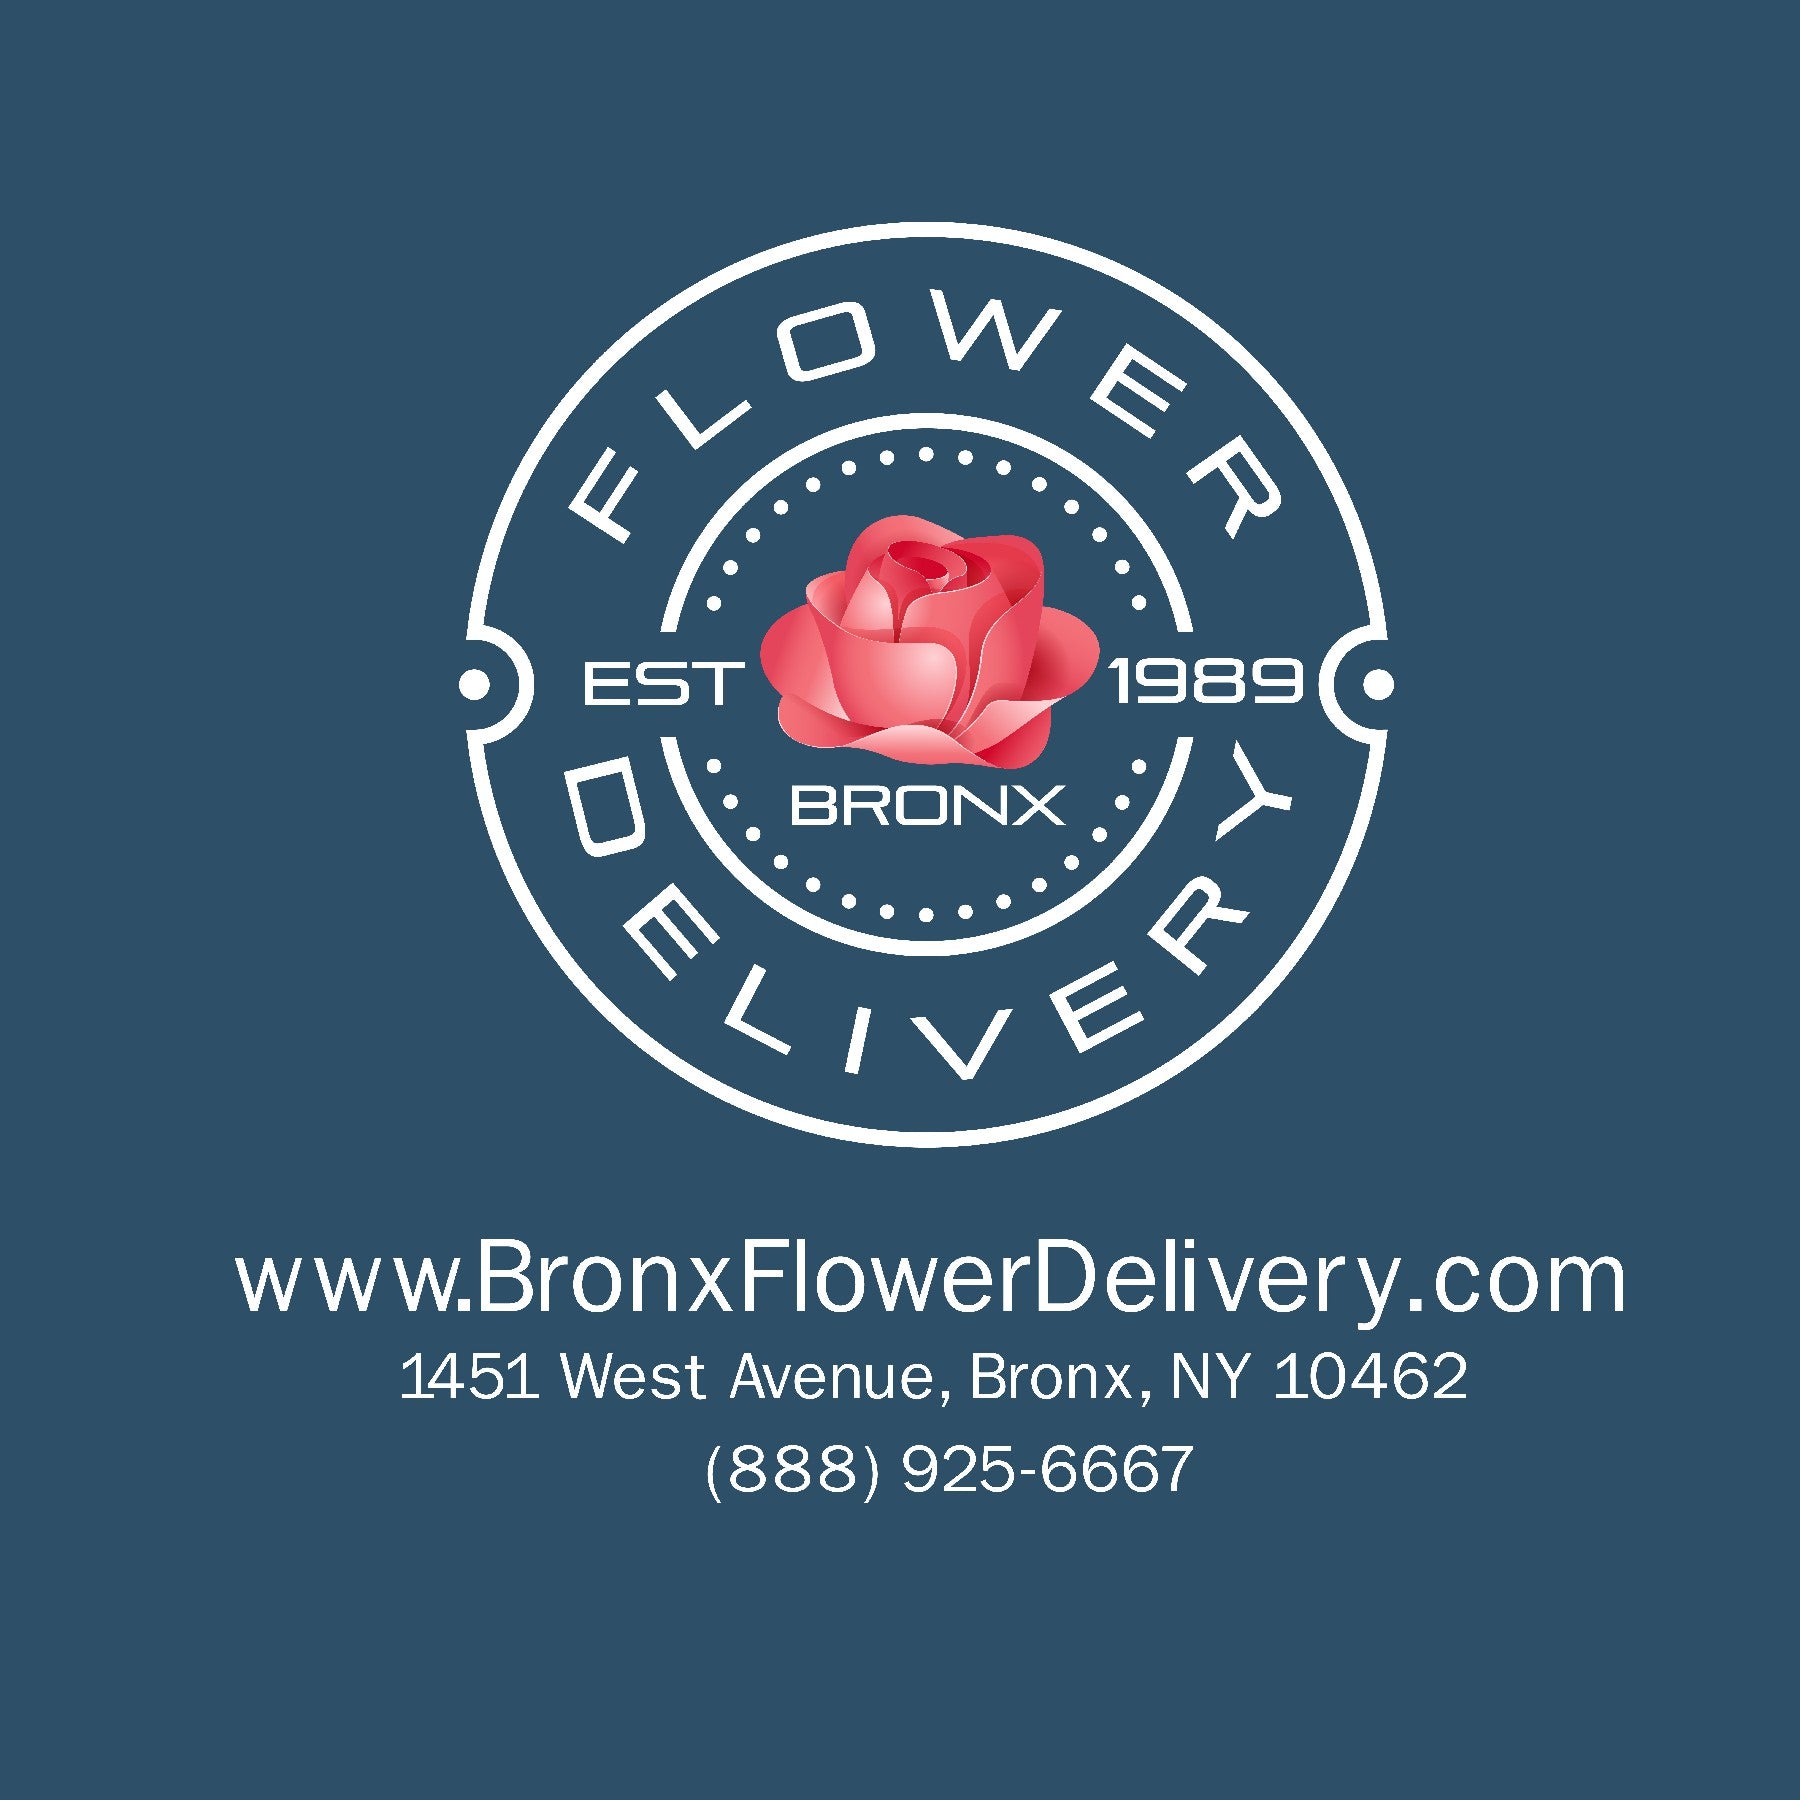 Bronx Flower Delivery